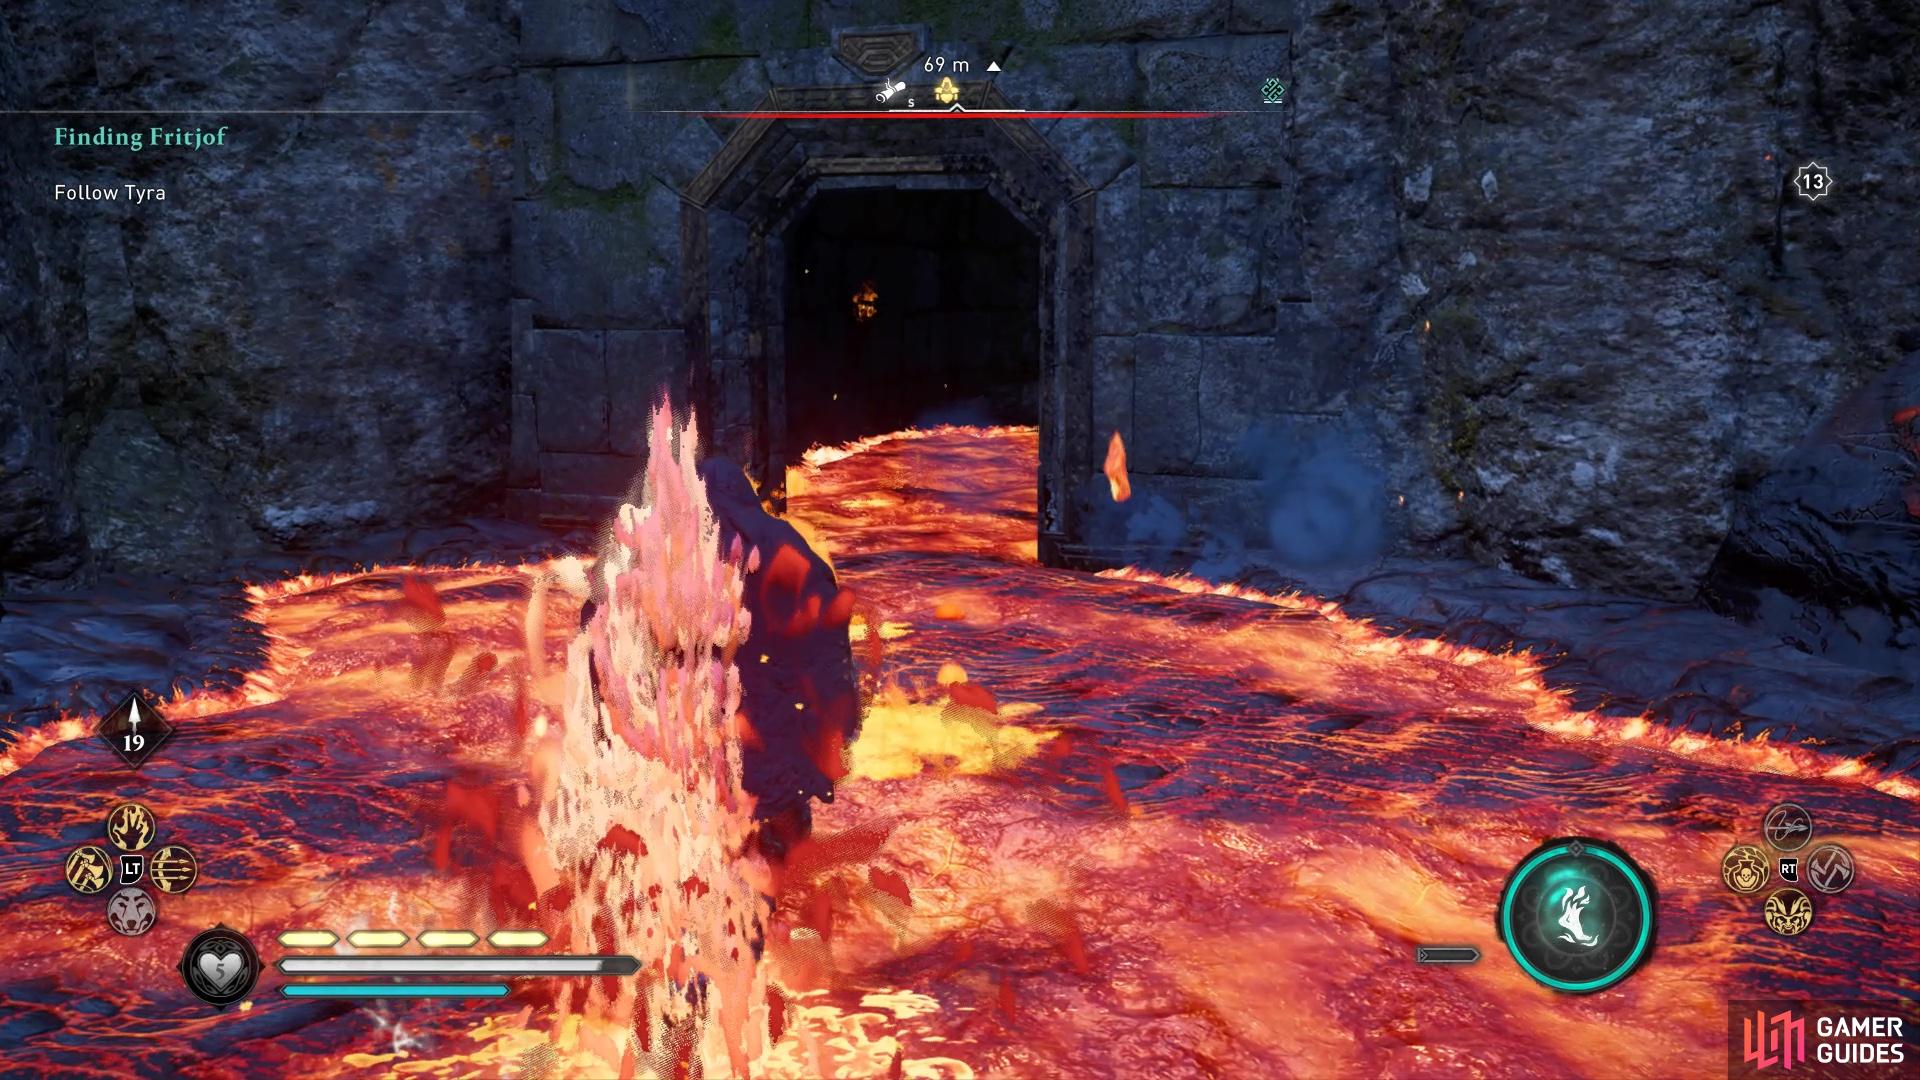 To unlock the chest, youll need to find the key inside this cave (you need the Power of Muspelheim).